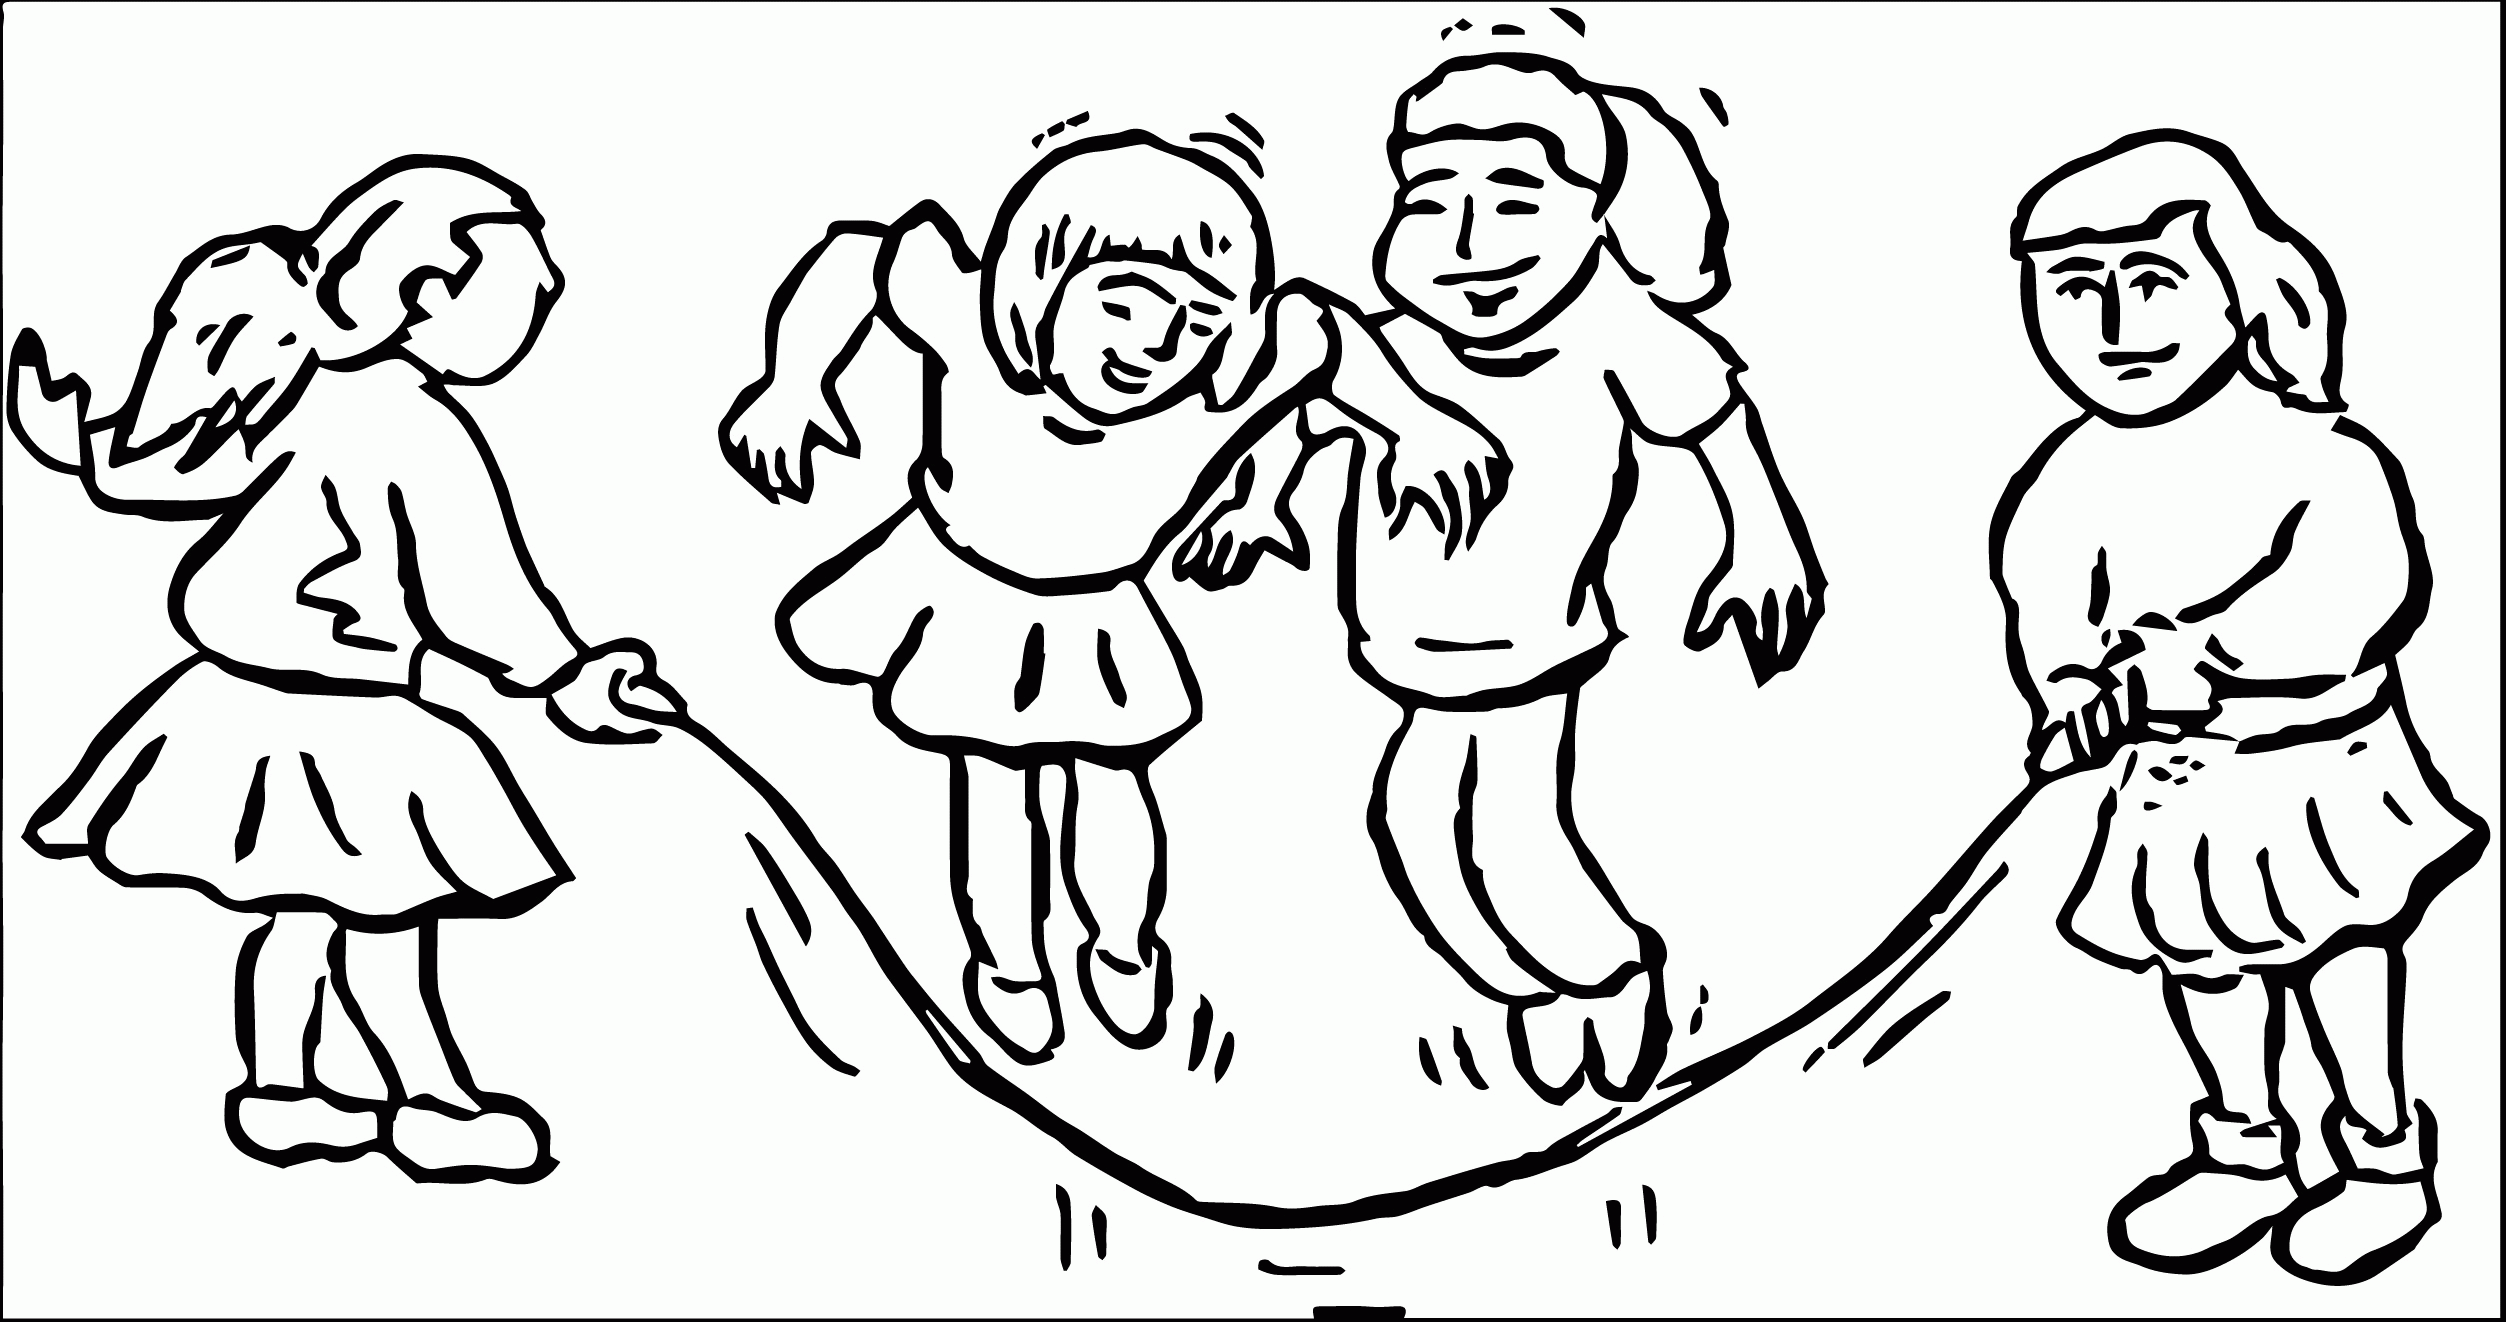 Clip Art Playing Children 187 Kids We Coloring Page | Wecoloringpage